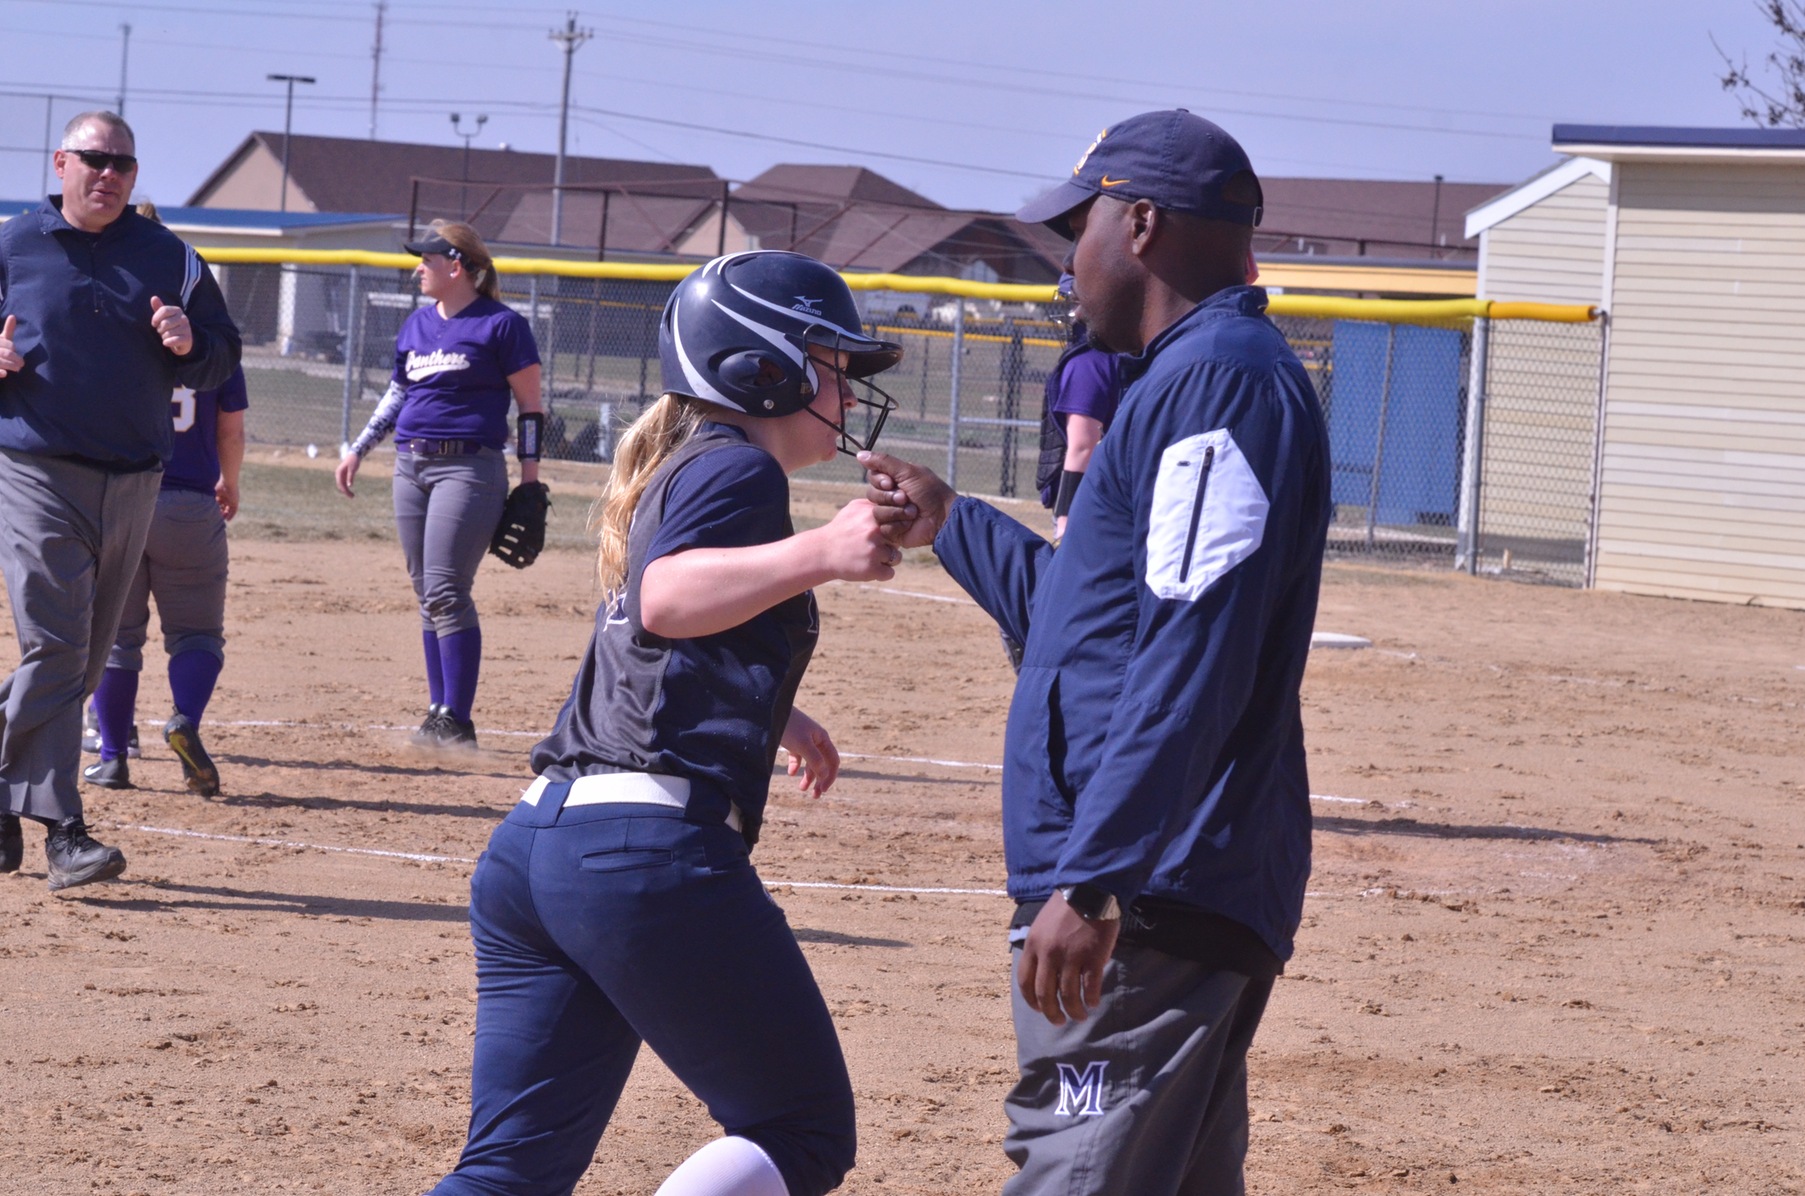 Shaena Robinson blasted her conference-leading ninth home run in game one Monday afternoon